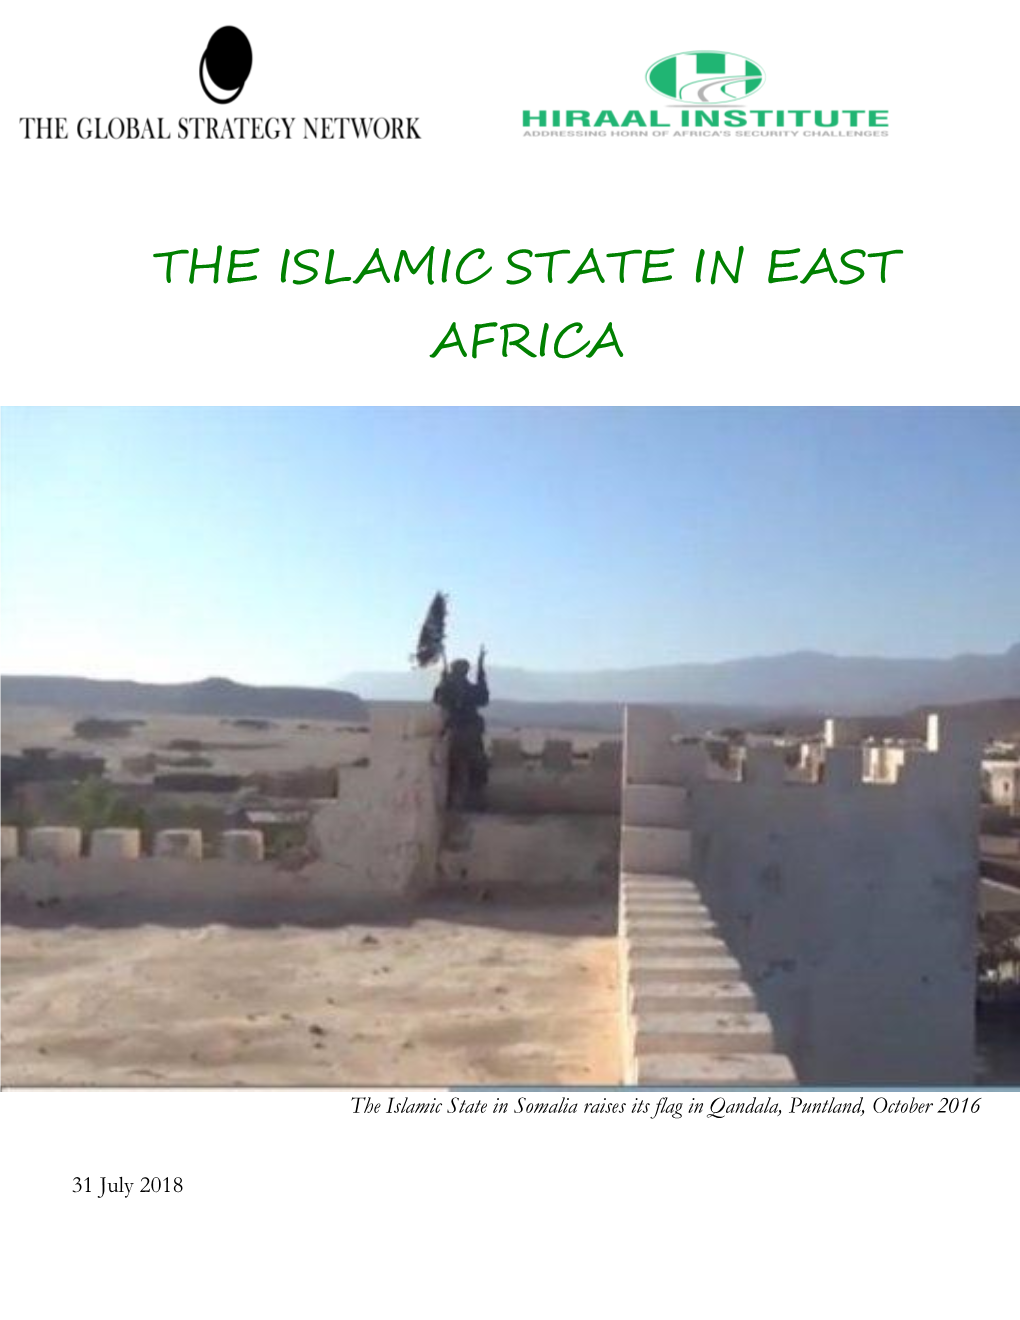 The Islamic State in East Africa